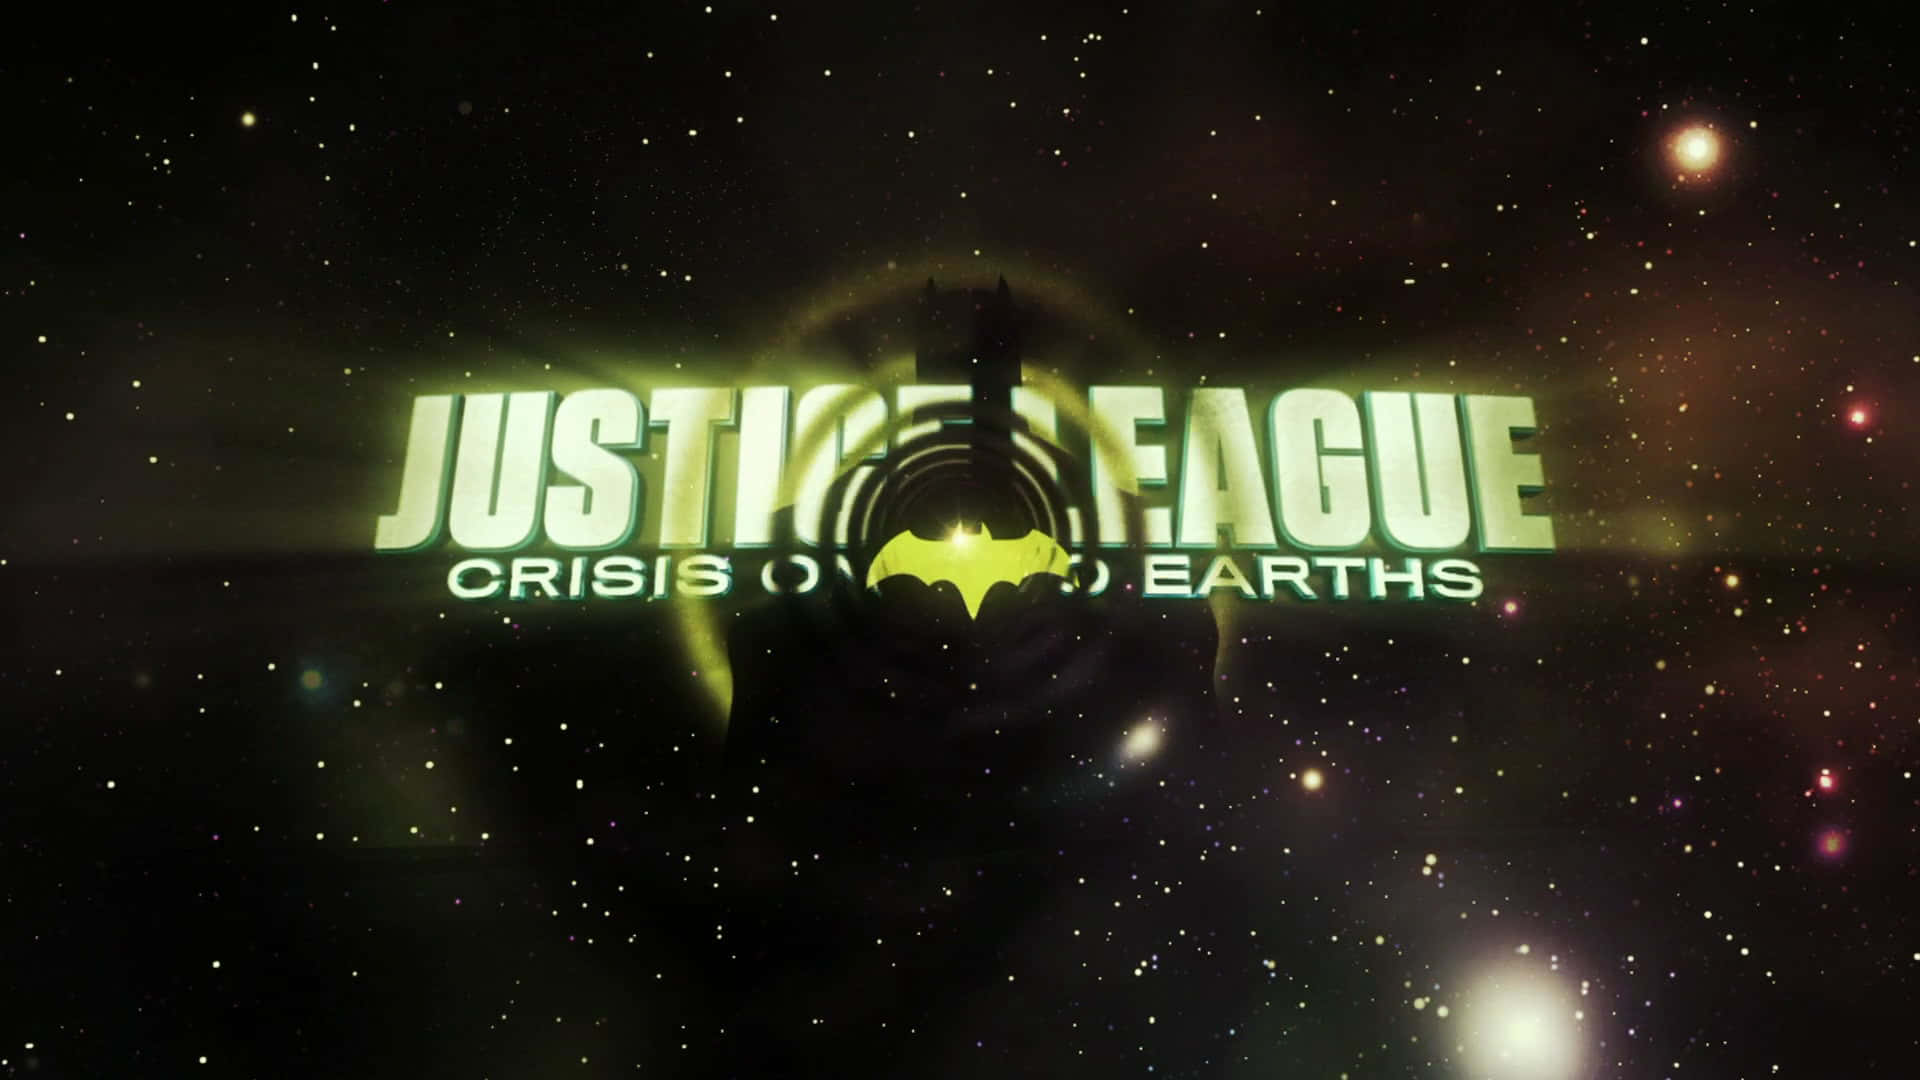 Justice League members assemble for action in Crisis On Two Earths Wallpaper